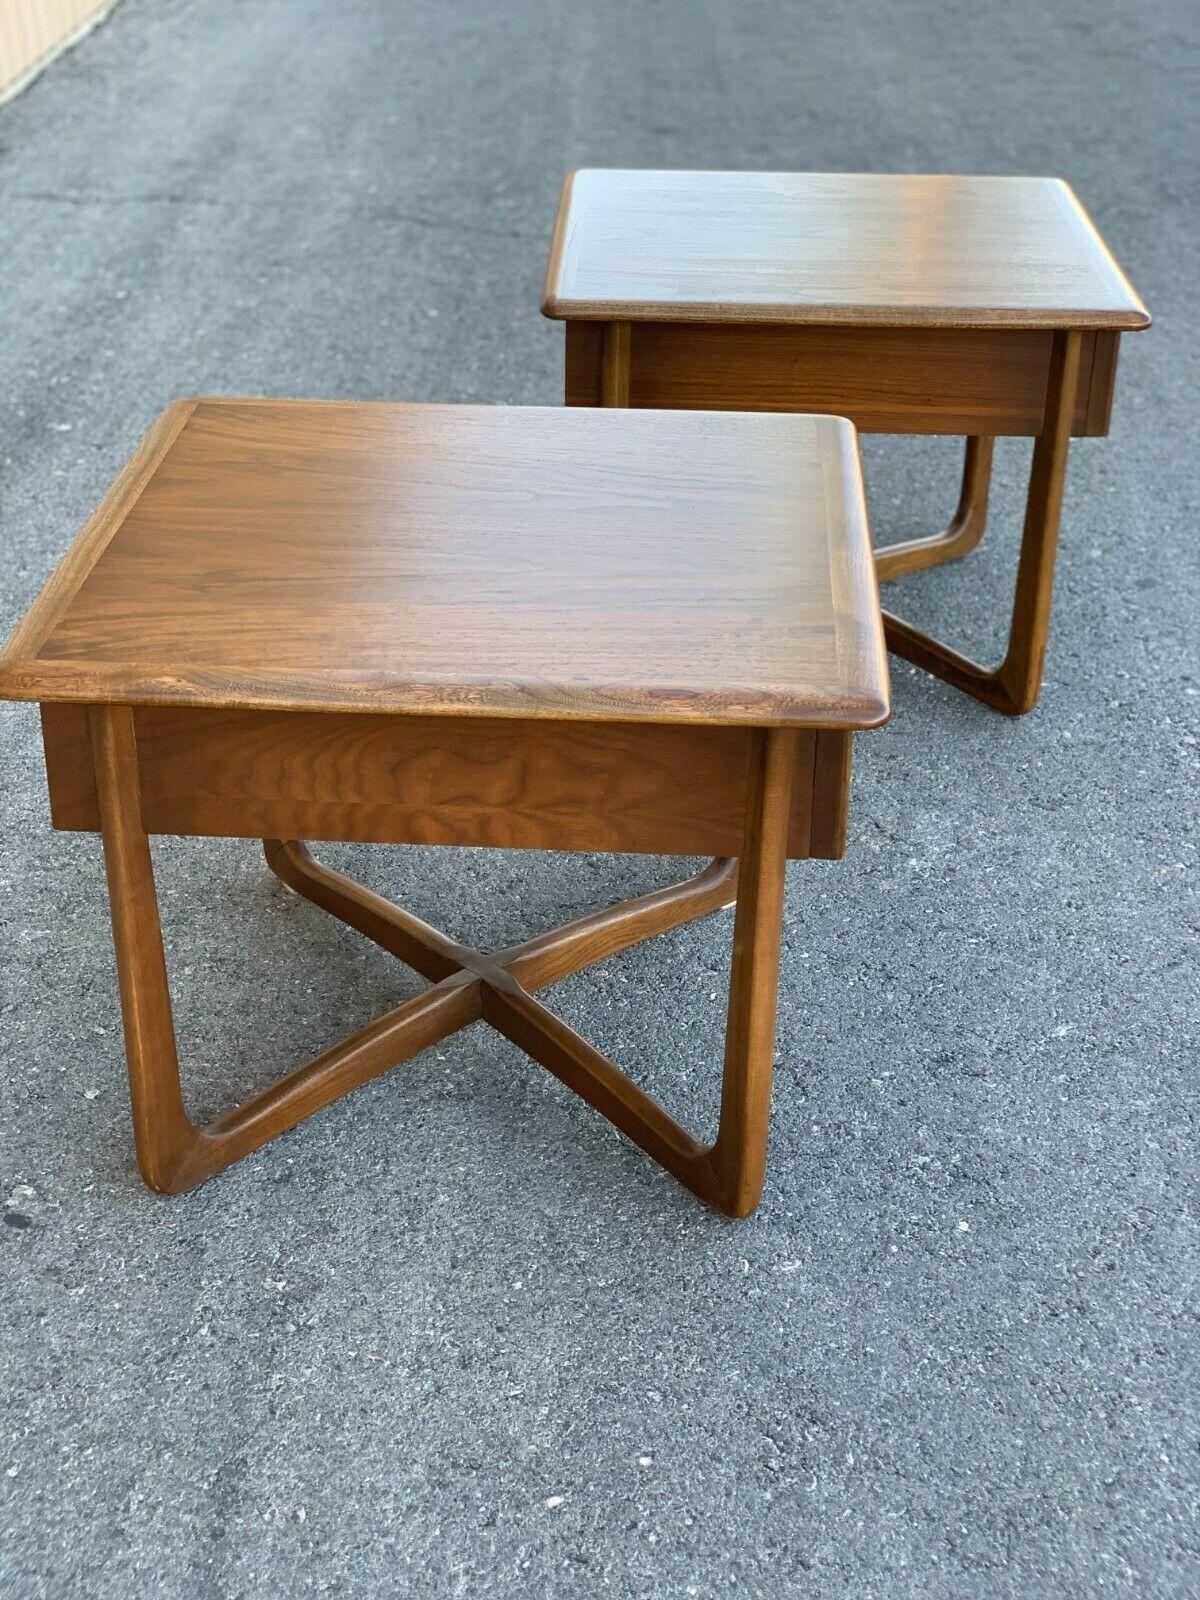 1960s pair Mid-Century Modern Danish Lane Perception side tables
Mid-Century Modern Lane Perception tables. Quality American construction paired with fine design. Top surface is walnut wood with contrasting oak trim tracing the perimeter. Elegant